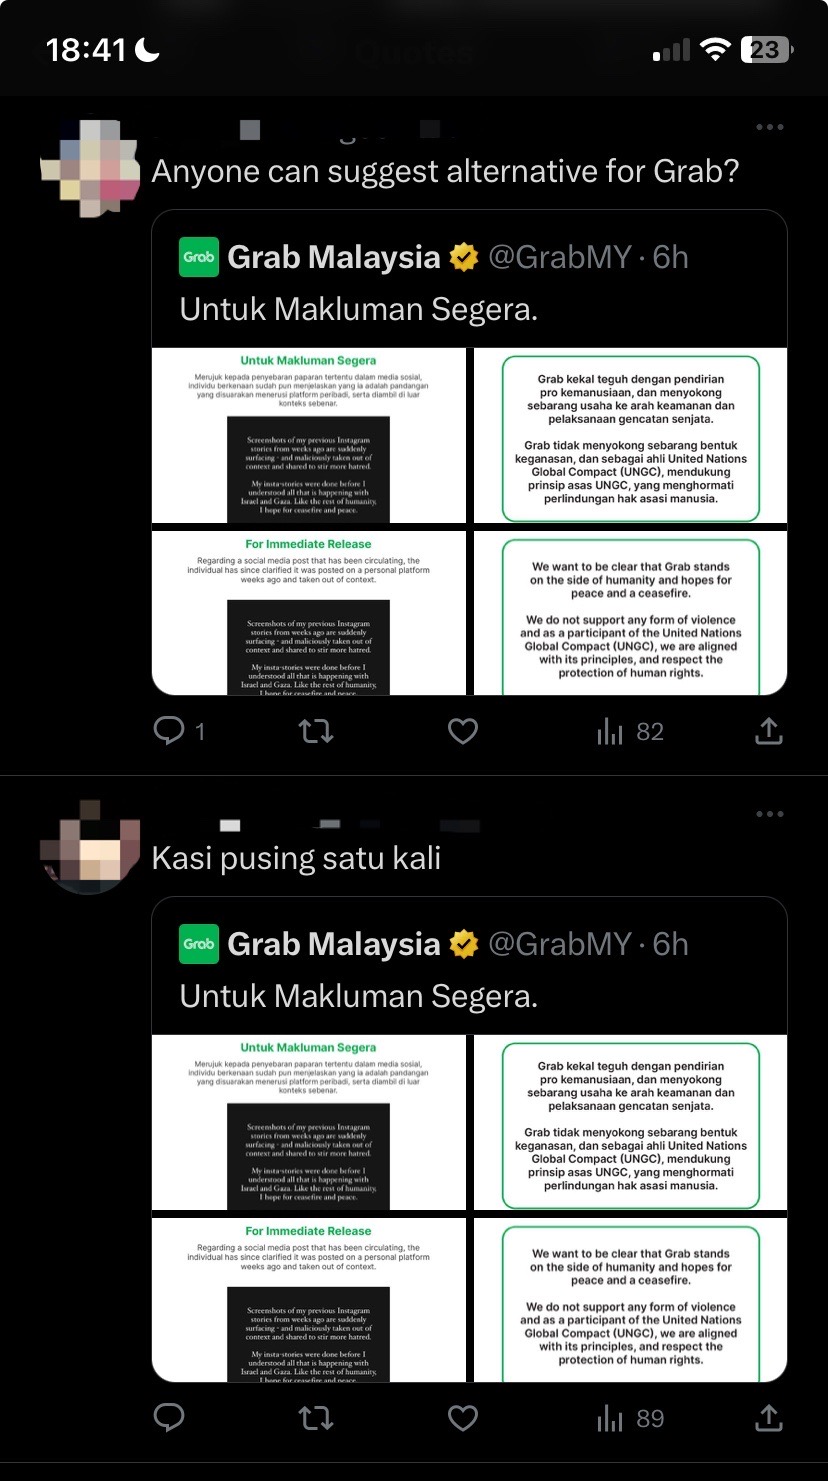 M'sians call for grab to be cancelled after wife of its co-founder shares her israel trip on ig - comment